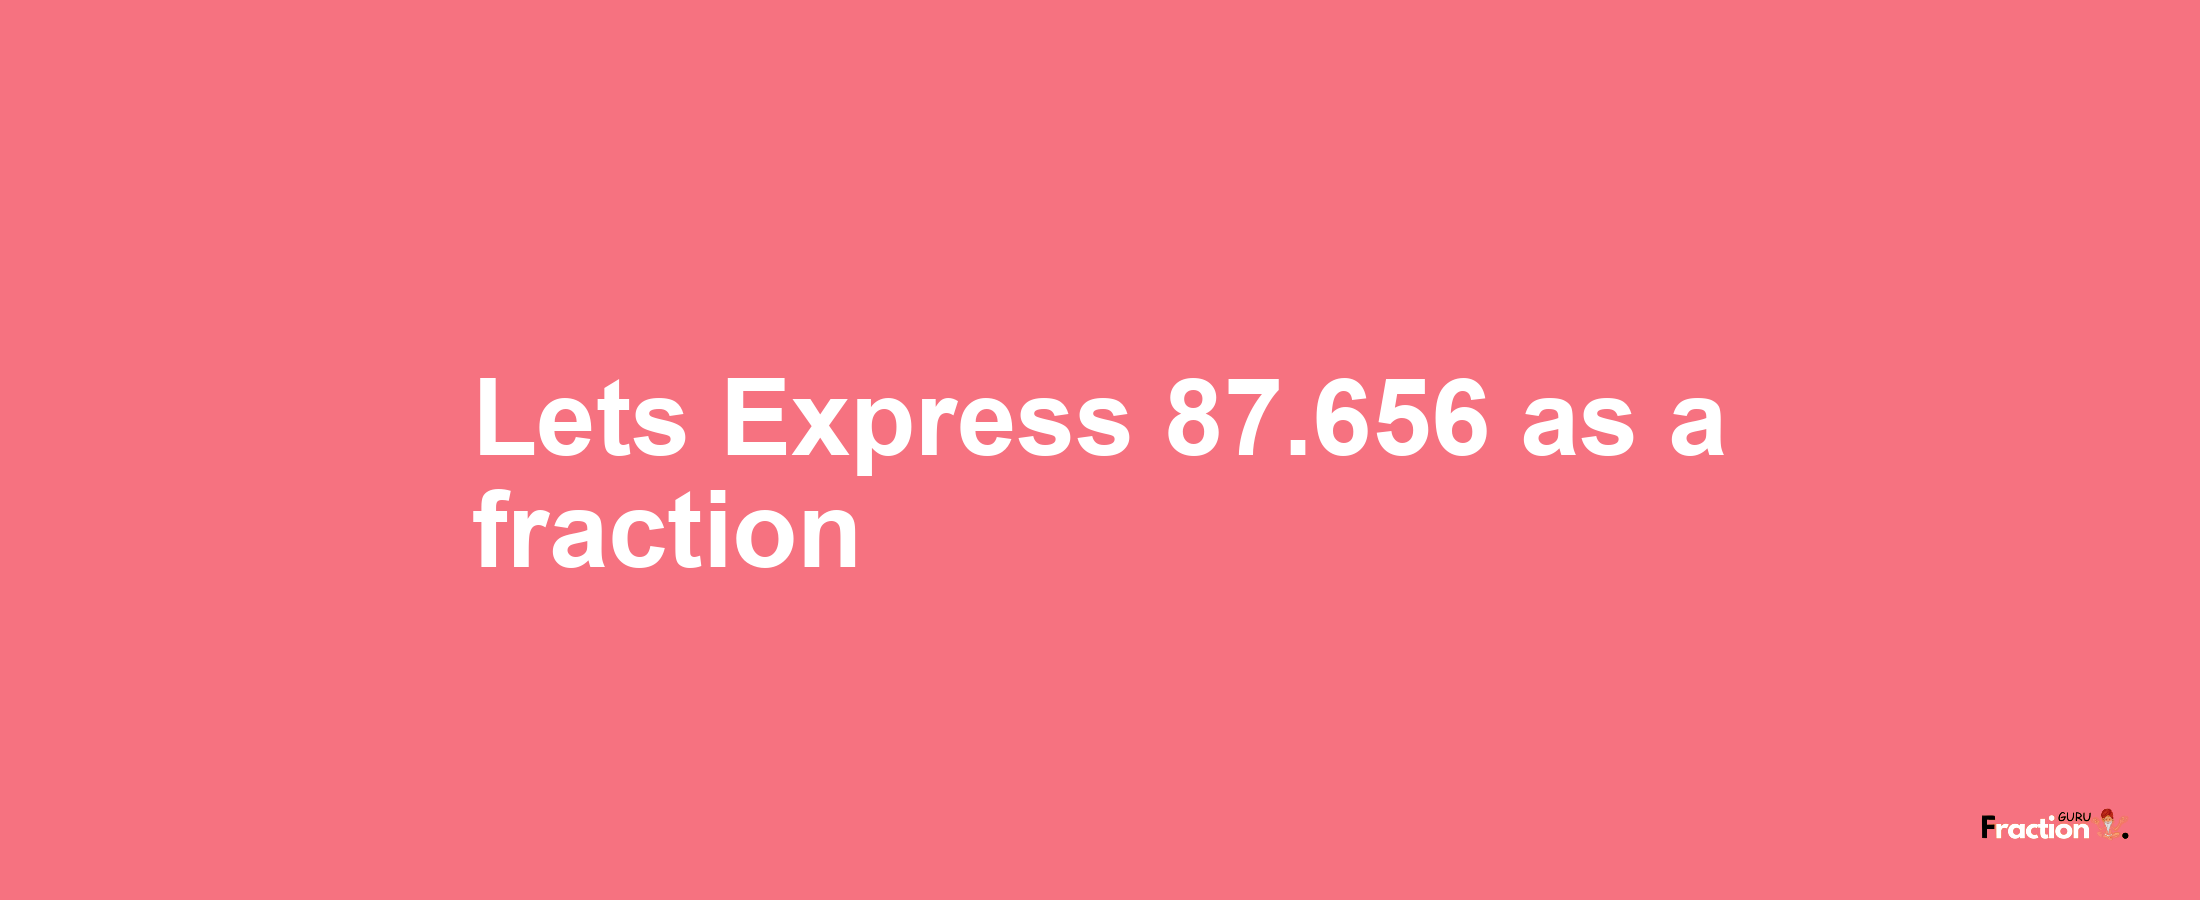 Lets Express 87.656 as afraction